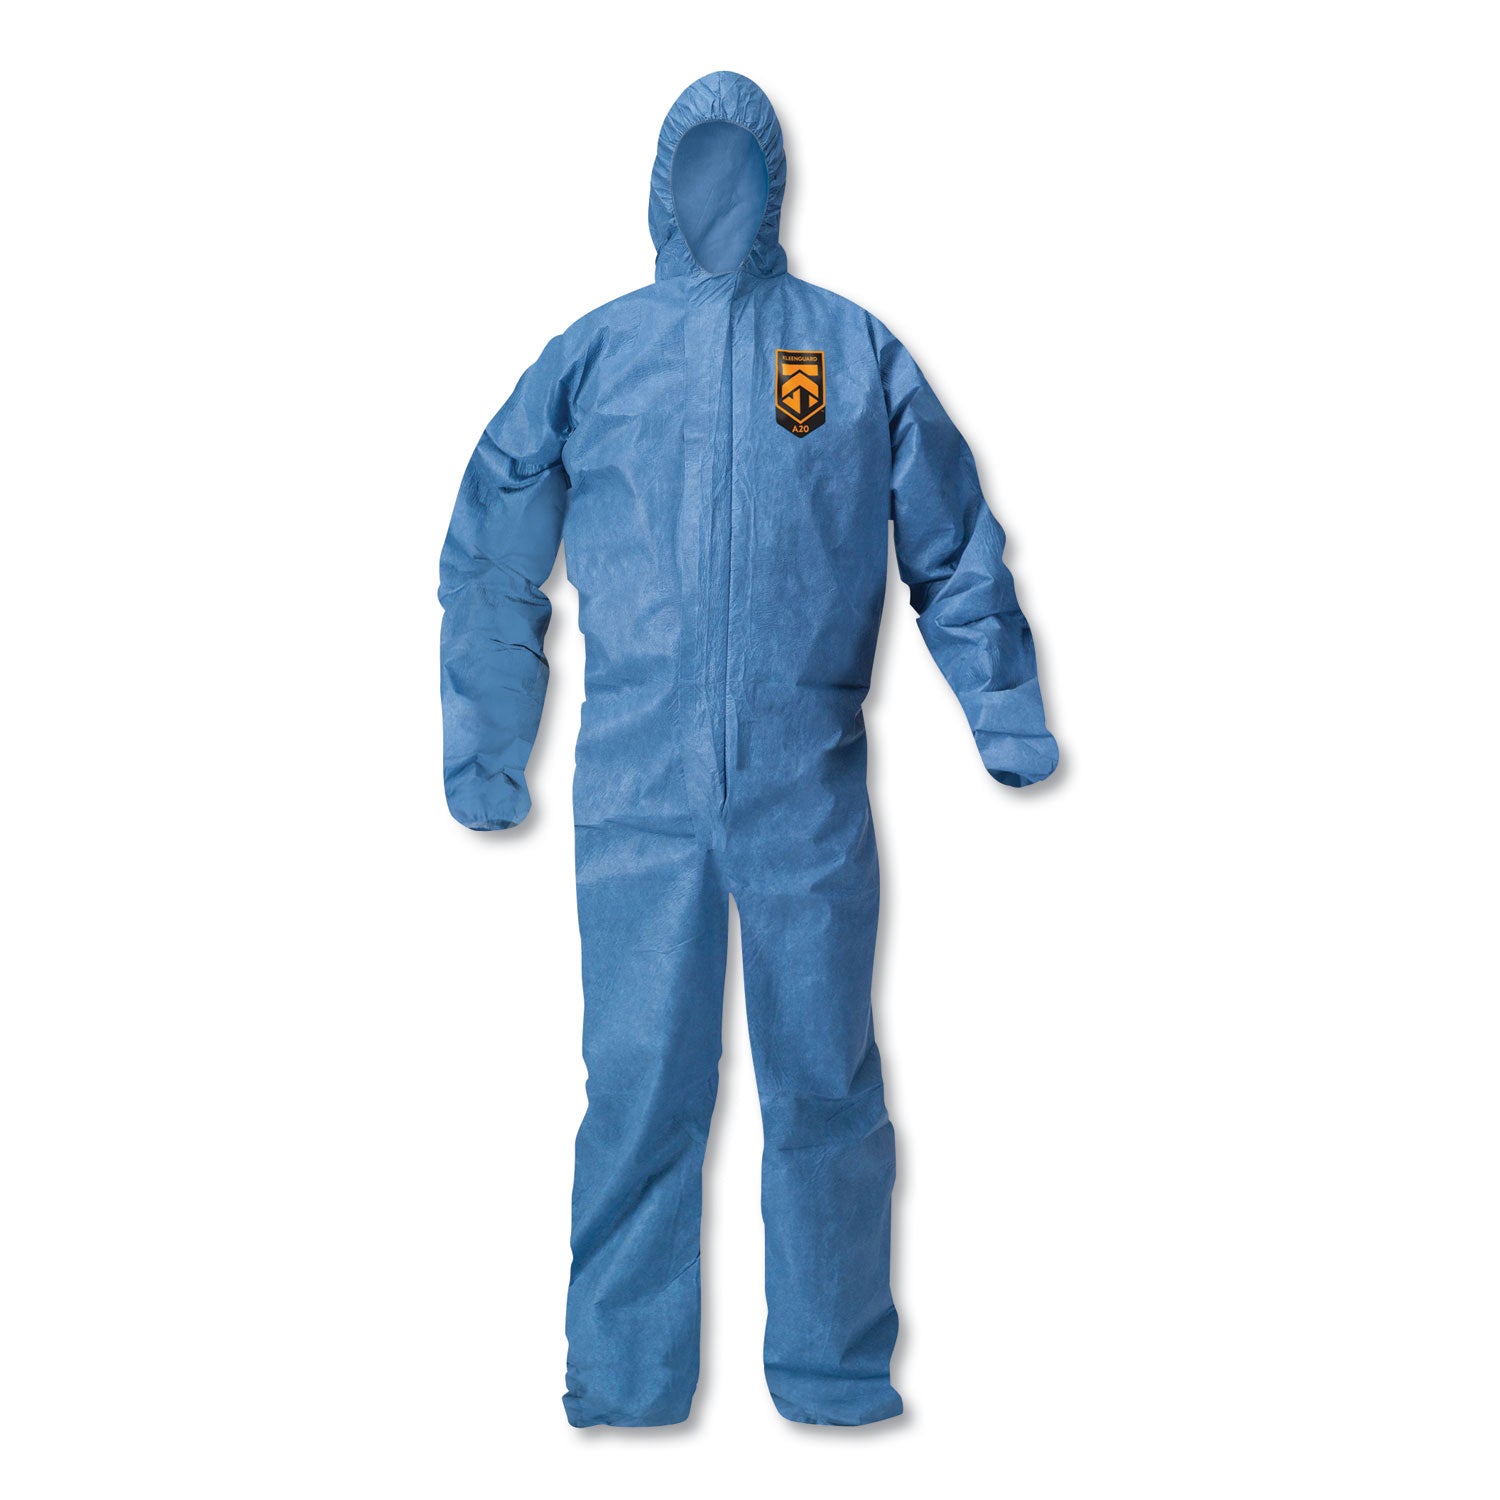 a20-breathable-particle-protection-coveralls-x-large-blue-24-carton_kcc58514 - 1